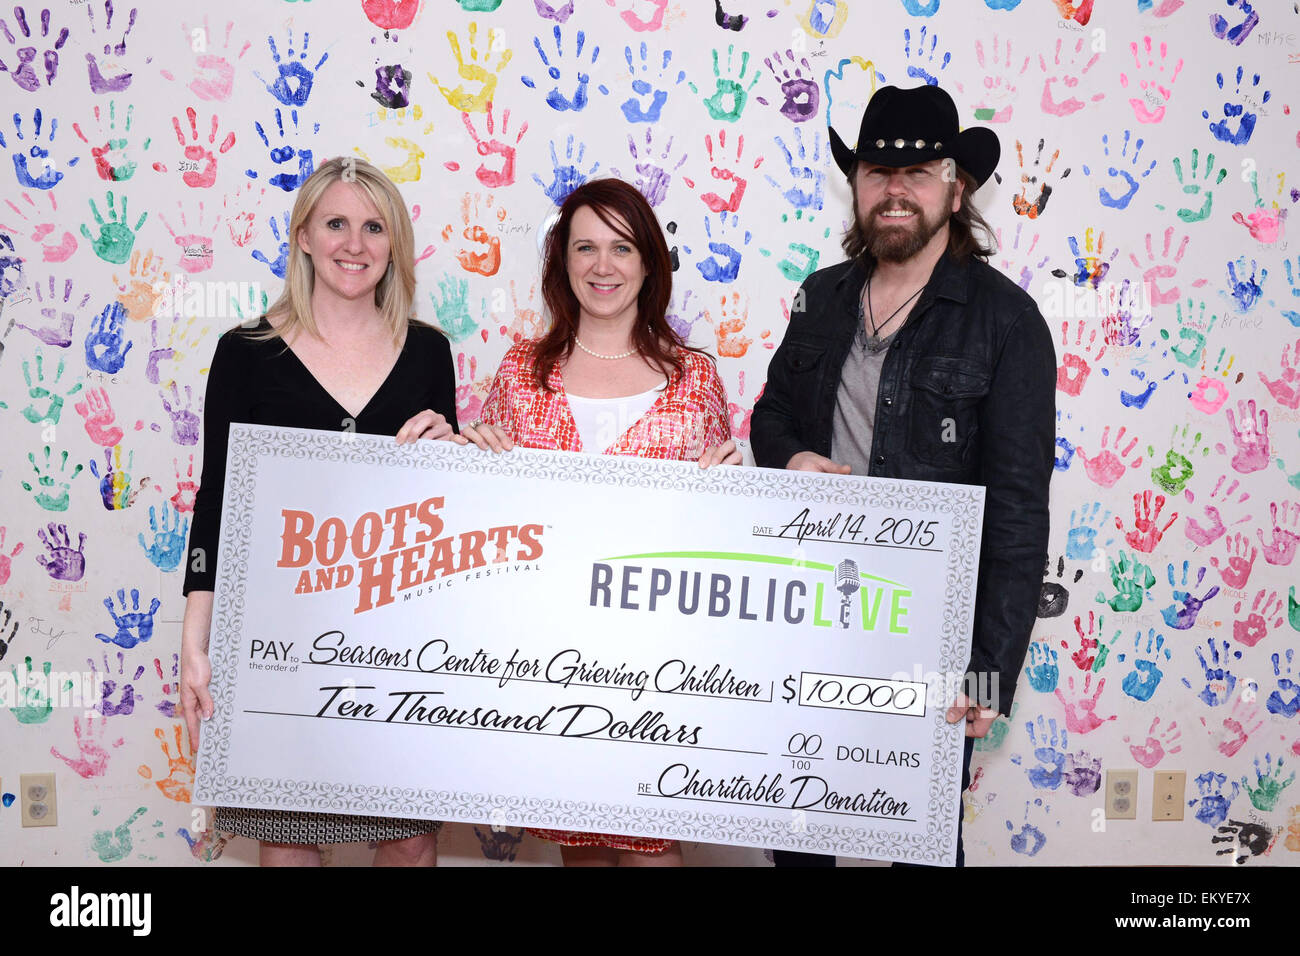 Barrie, Ontario, Canada. 14th April 2015. Canadian country music singer Jason McCoy at the presentation of $10,000 donation check from Republic Live on behalf of Boots and Hearts to the Seasons Centre for Grieving Children. In picture, Marcy Baldry of Seasons Centre for Grieving Children, Laura Kennedy or Republic Live, and Jason McCoy. © EXImages/Alamy Live News Stock Photo